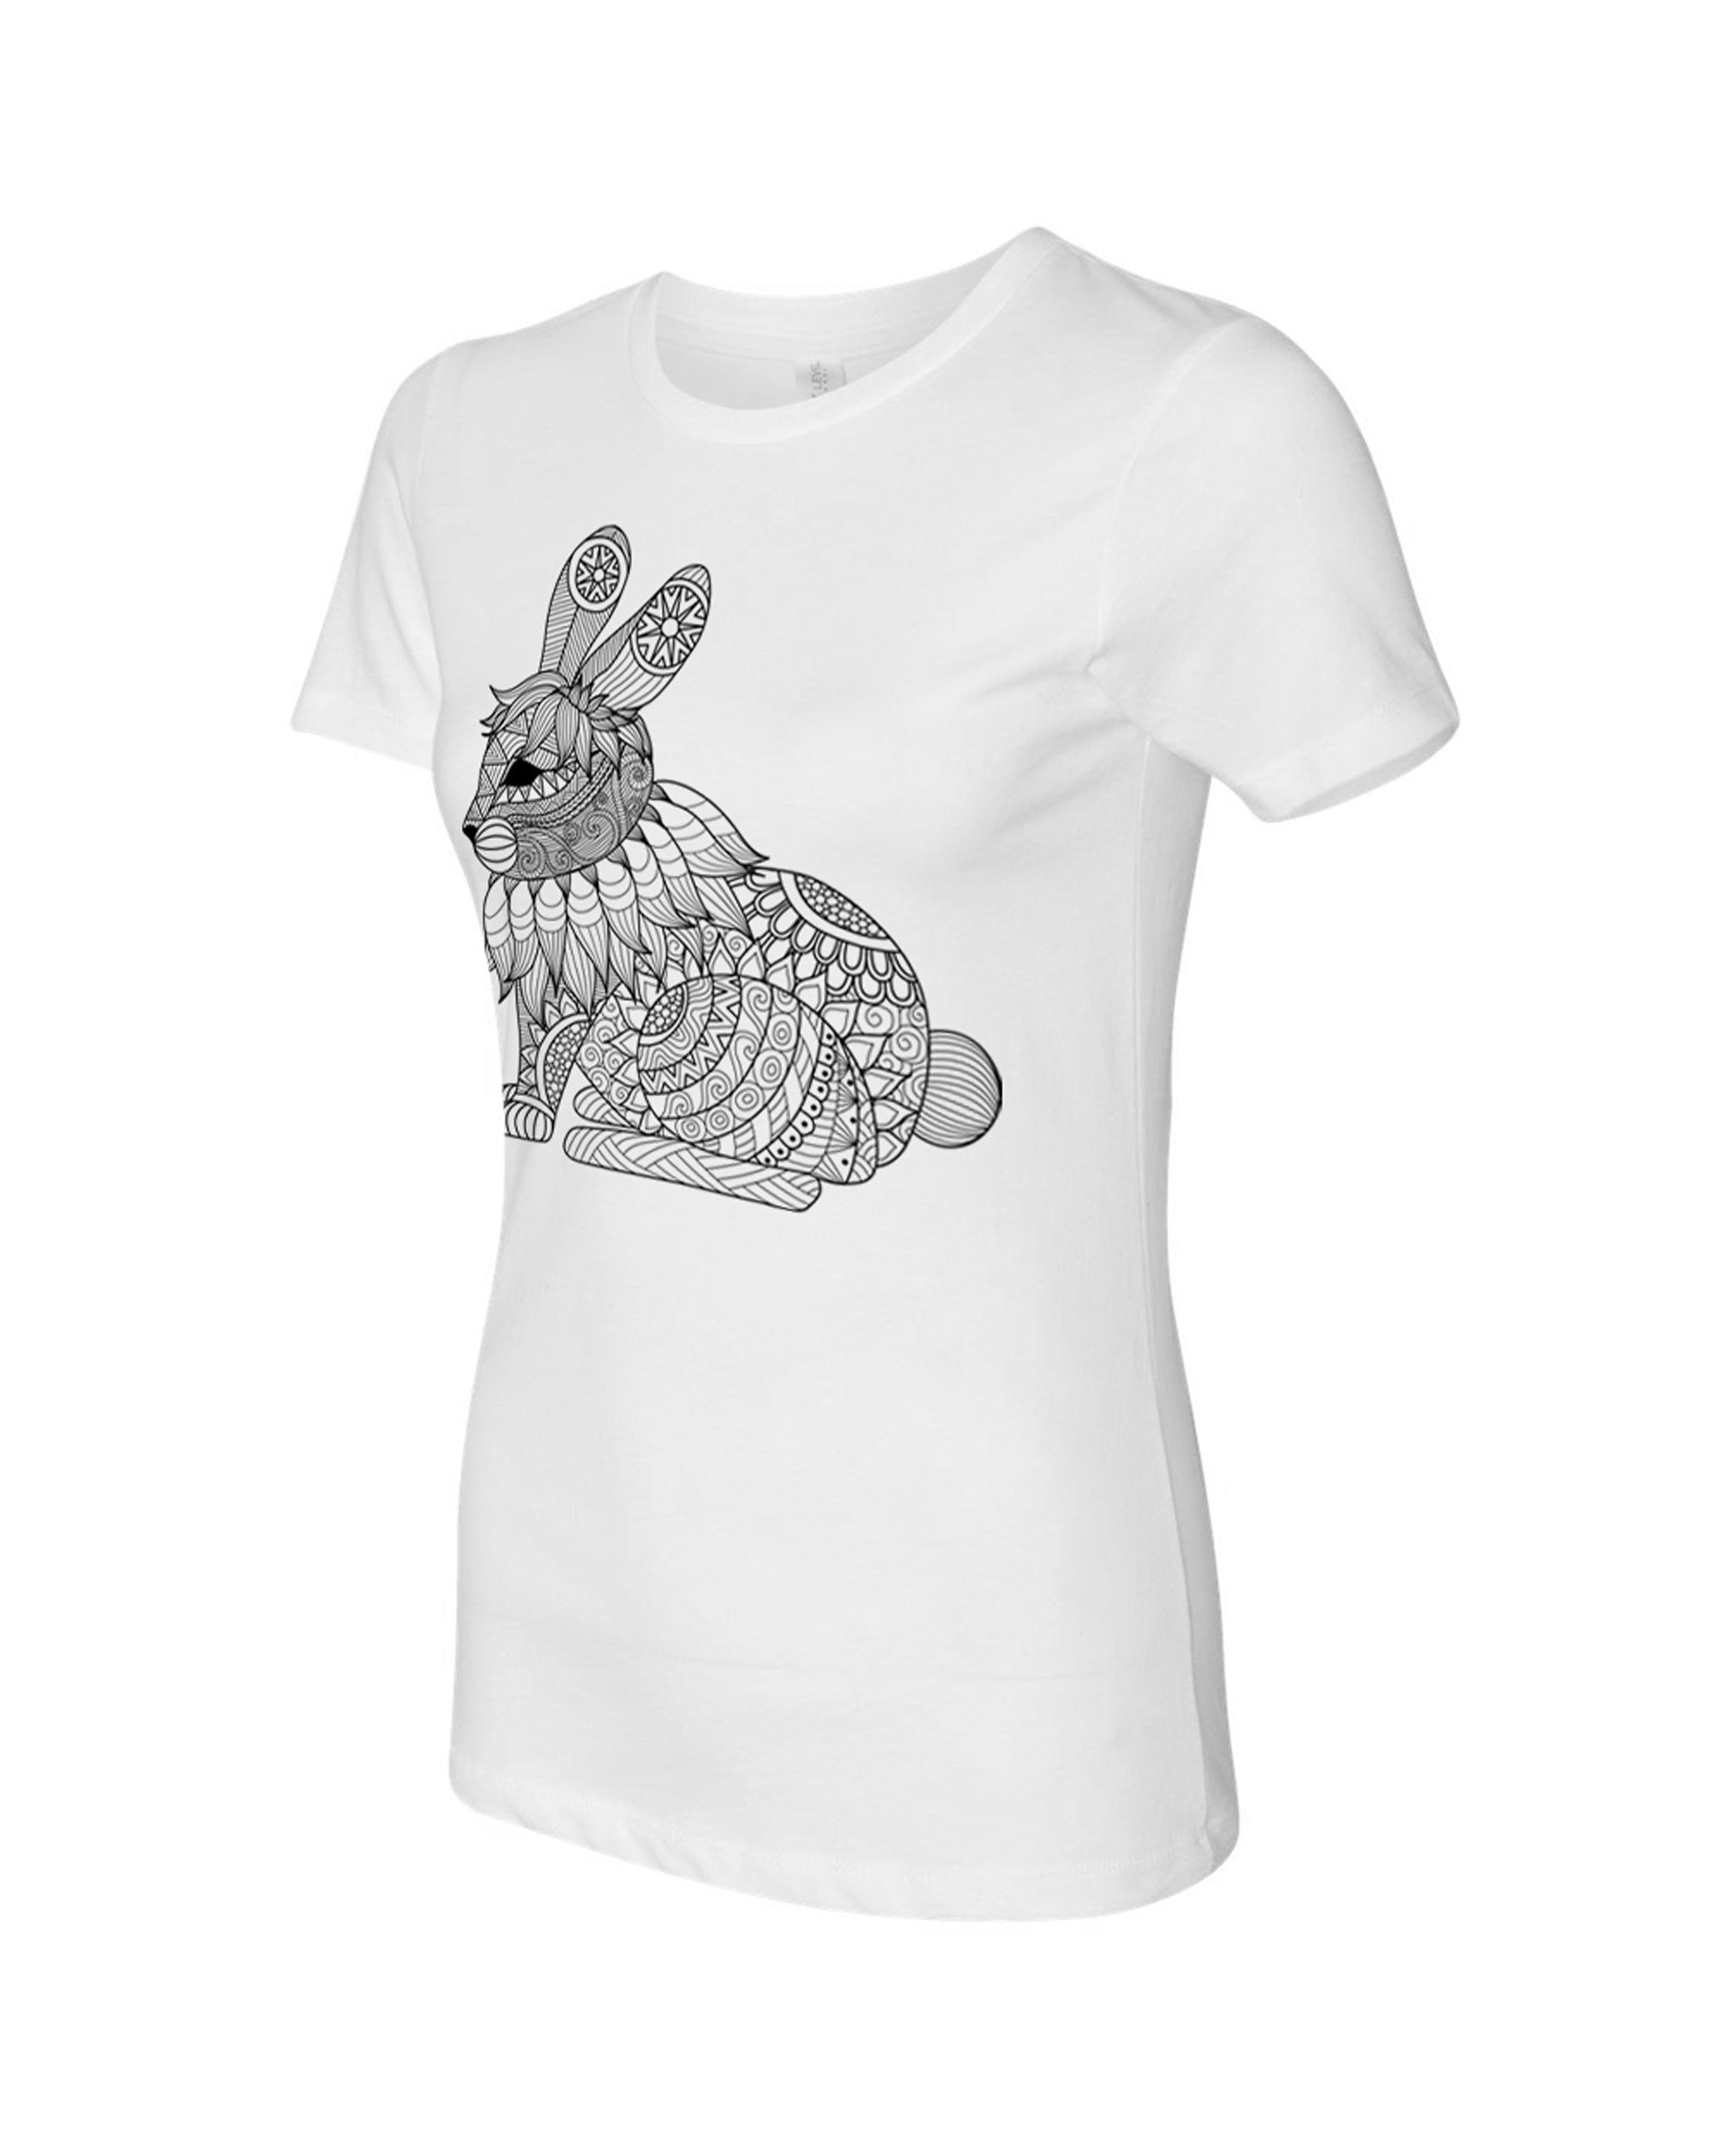 Women's  Coloring Bunny White T Shirt - Adorned By You